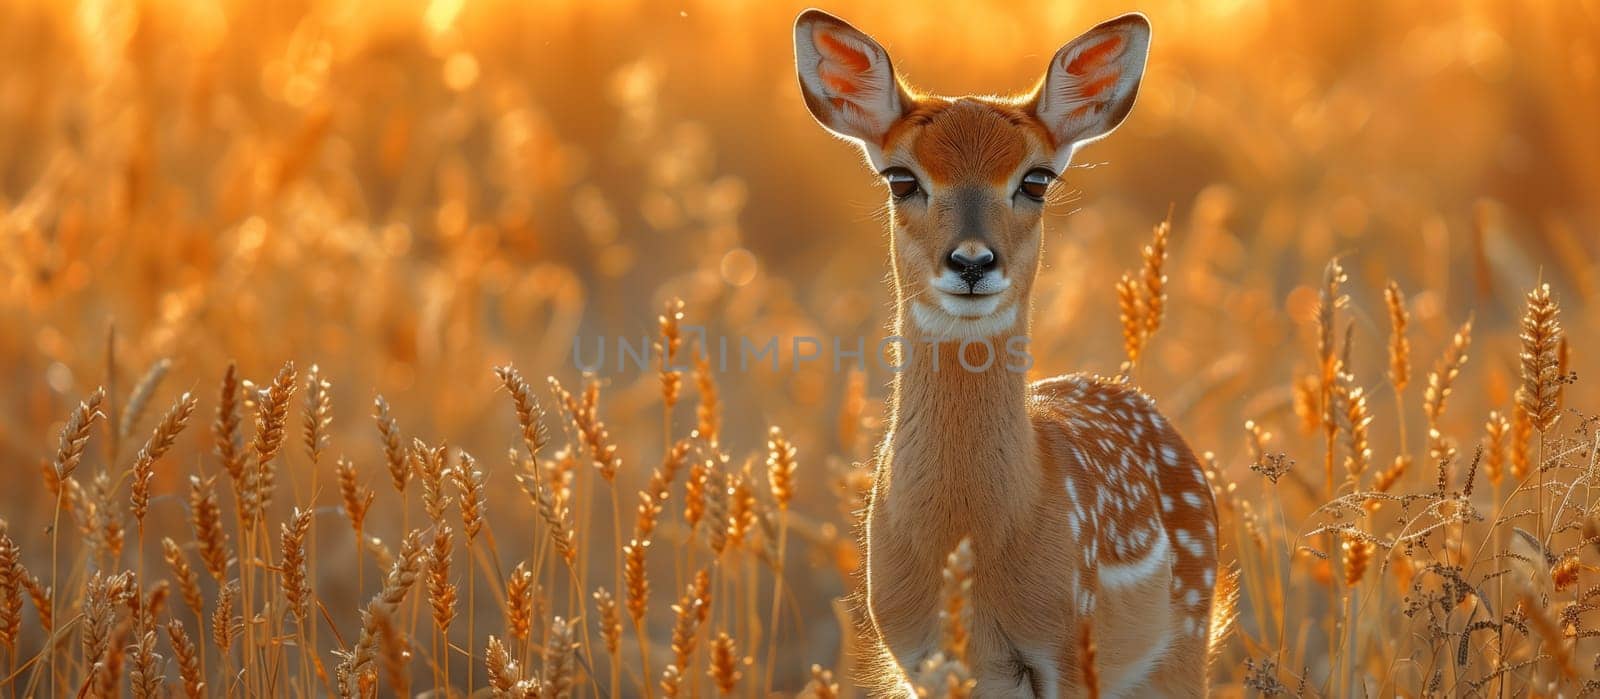 Whitetailed deer in grassland, gazing at camera in natural landscape by richwolf